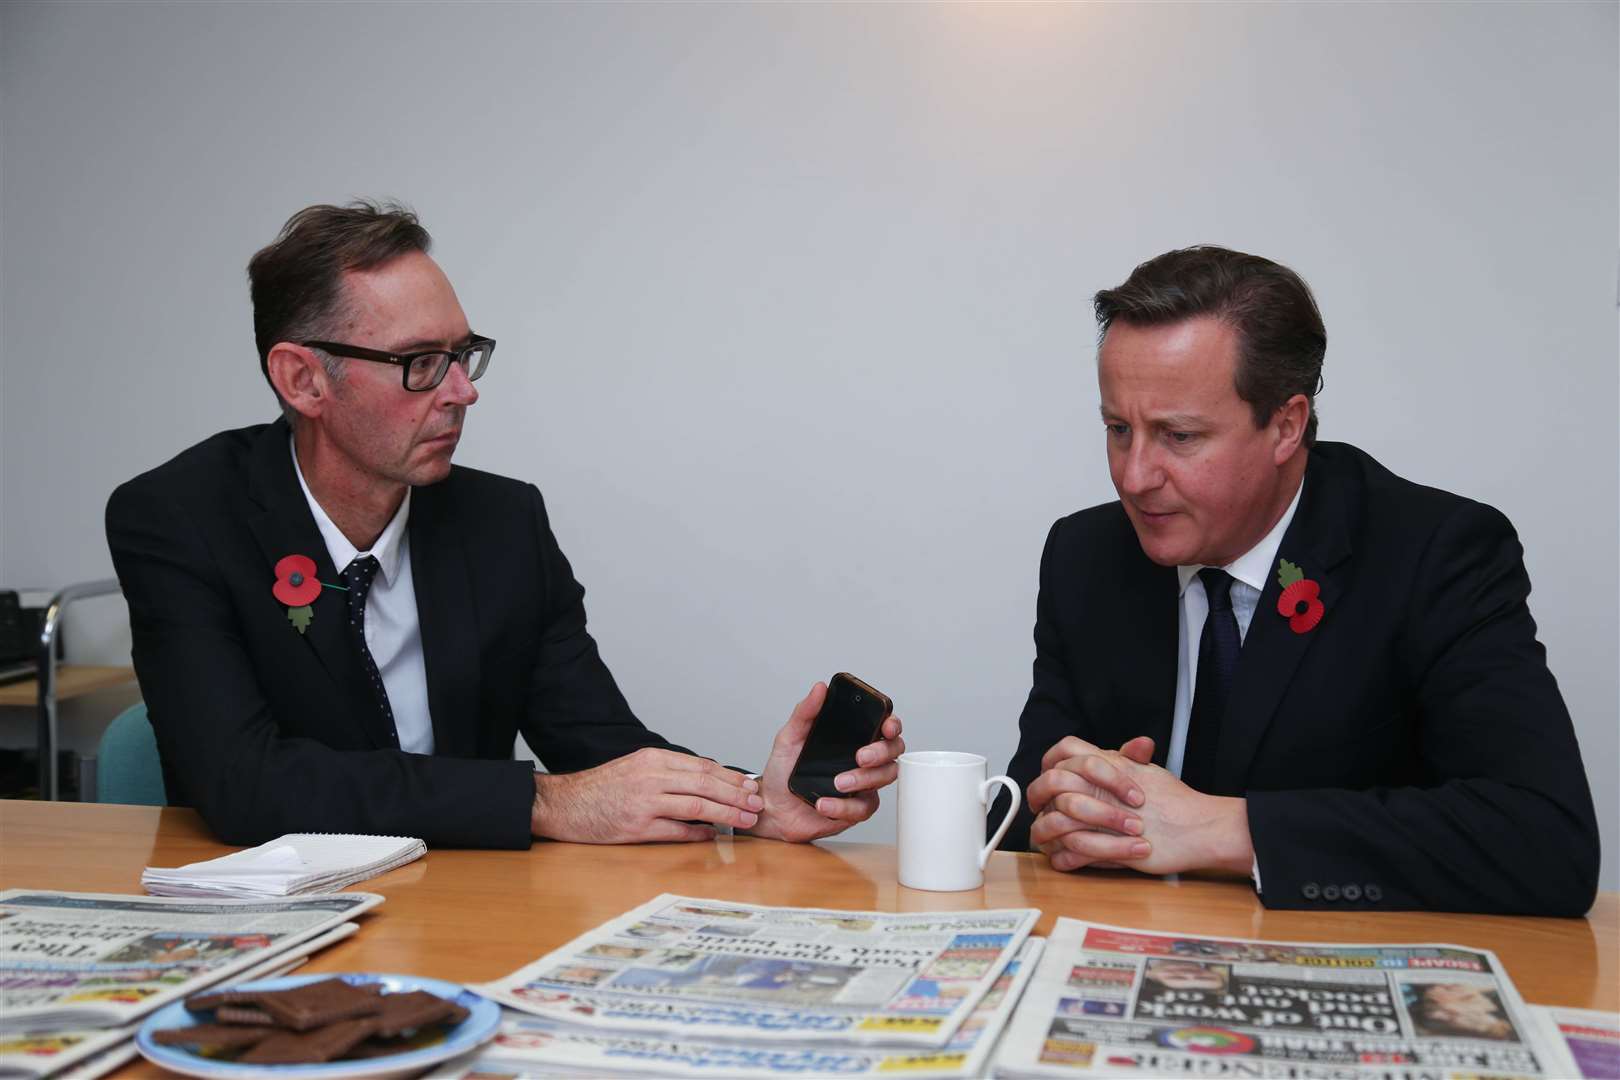 Paul Francis interviews Prime Minister David Cameron in 2014. Picture: Darren Small